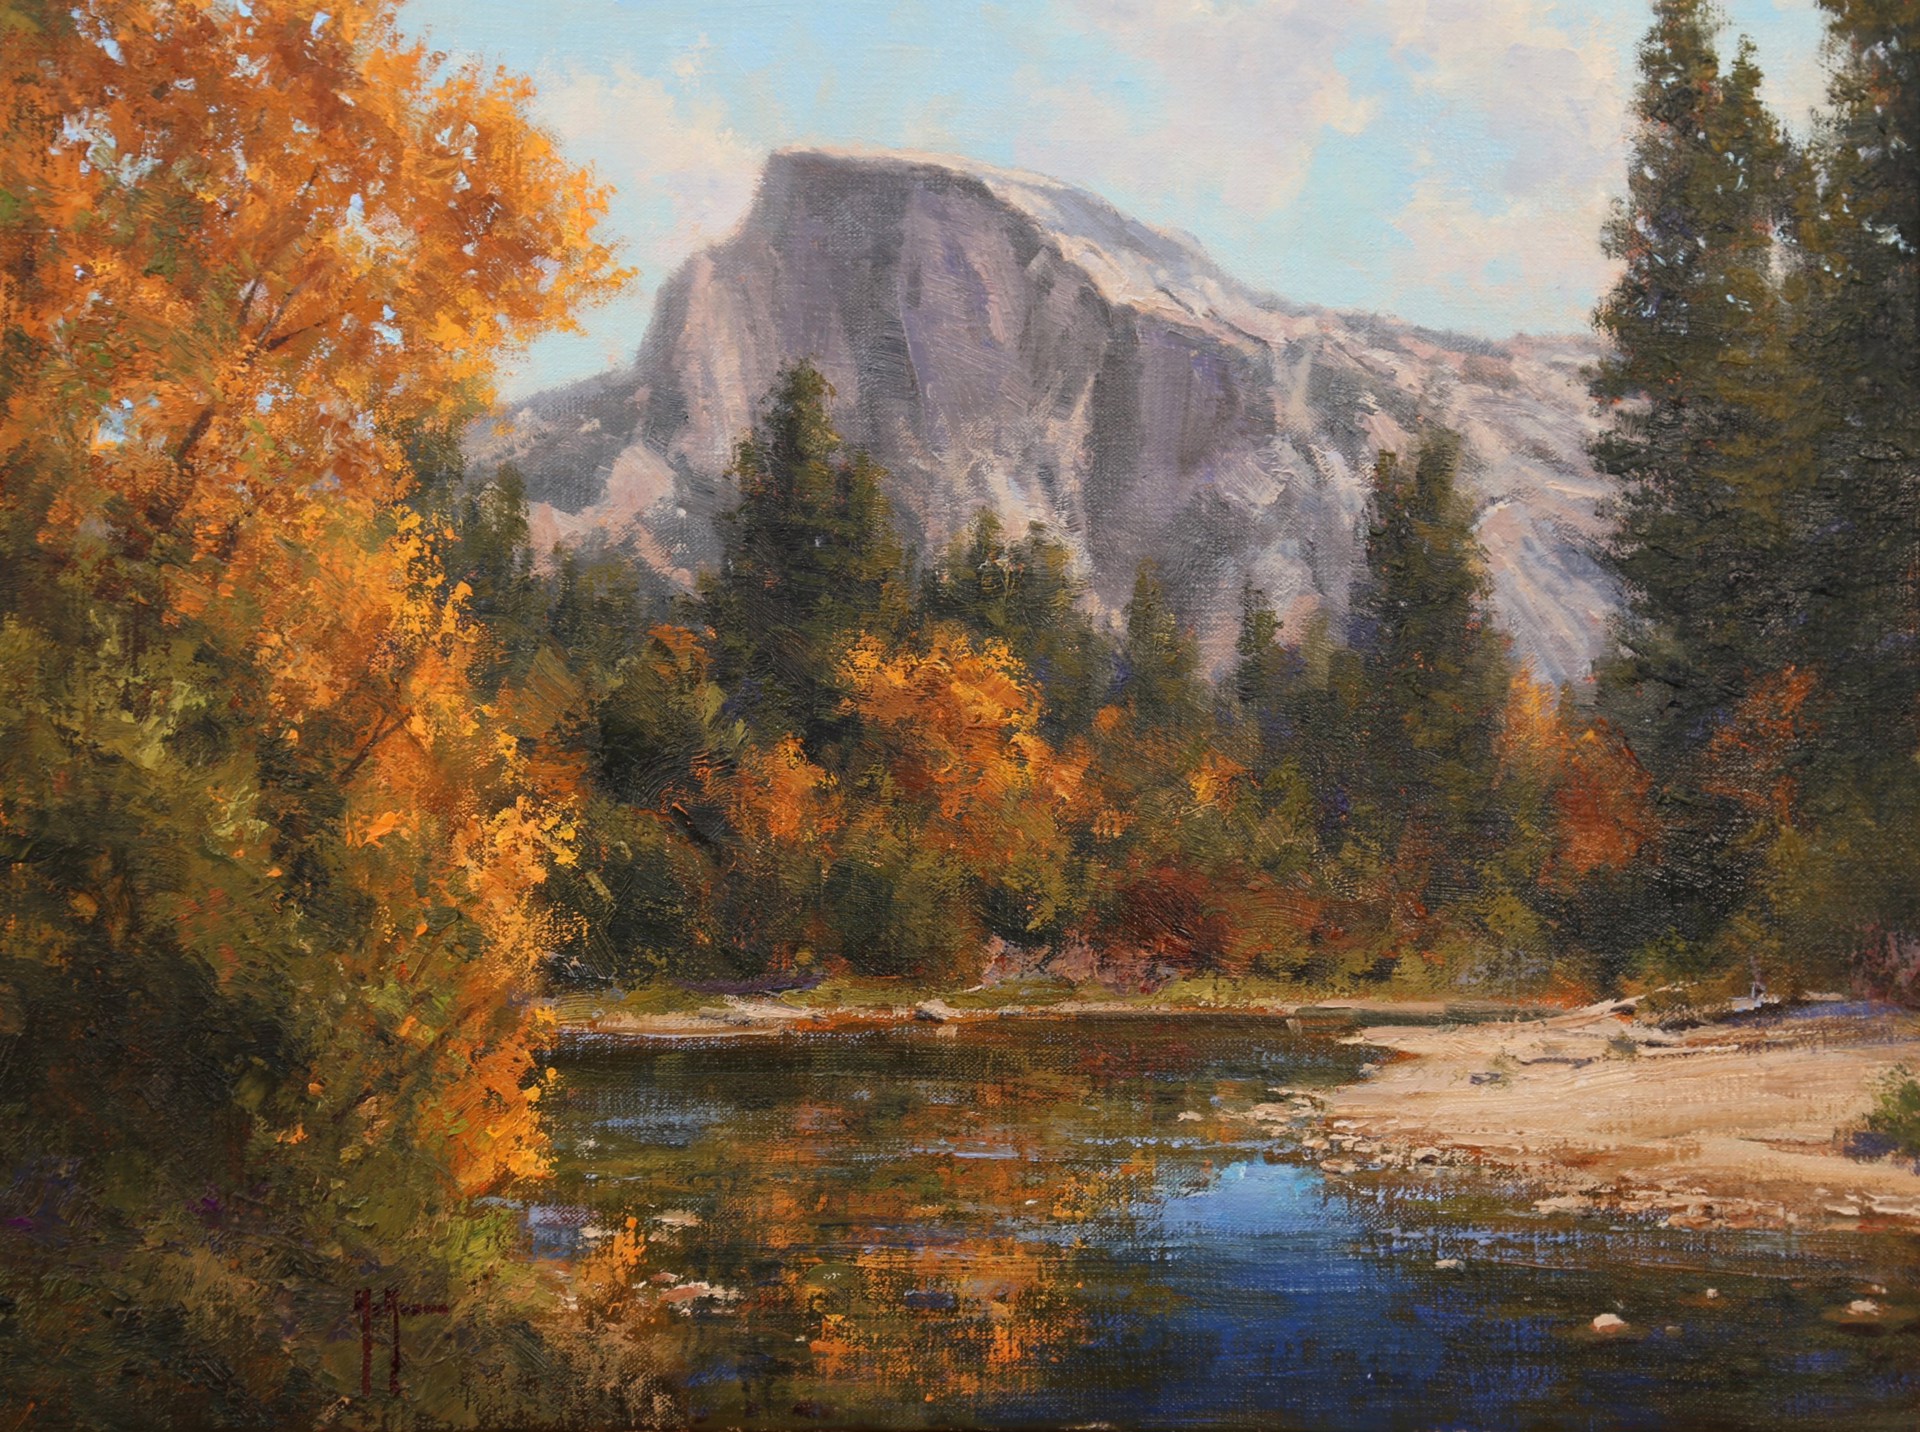 October at Half Dome by Kenny McKenna